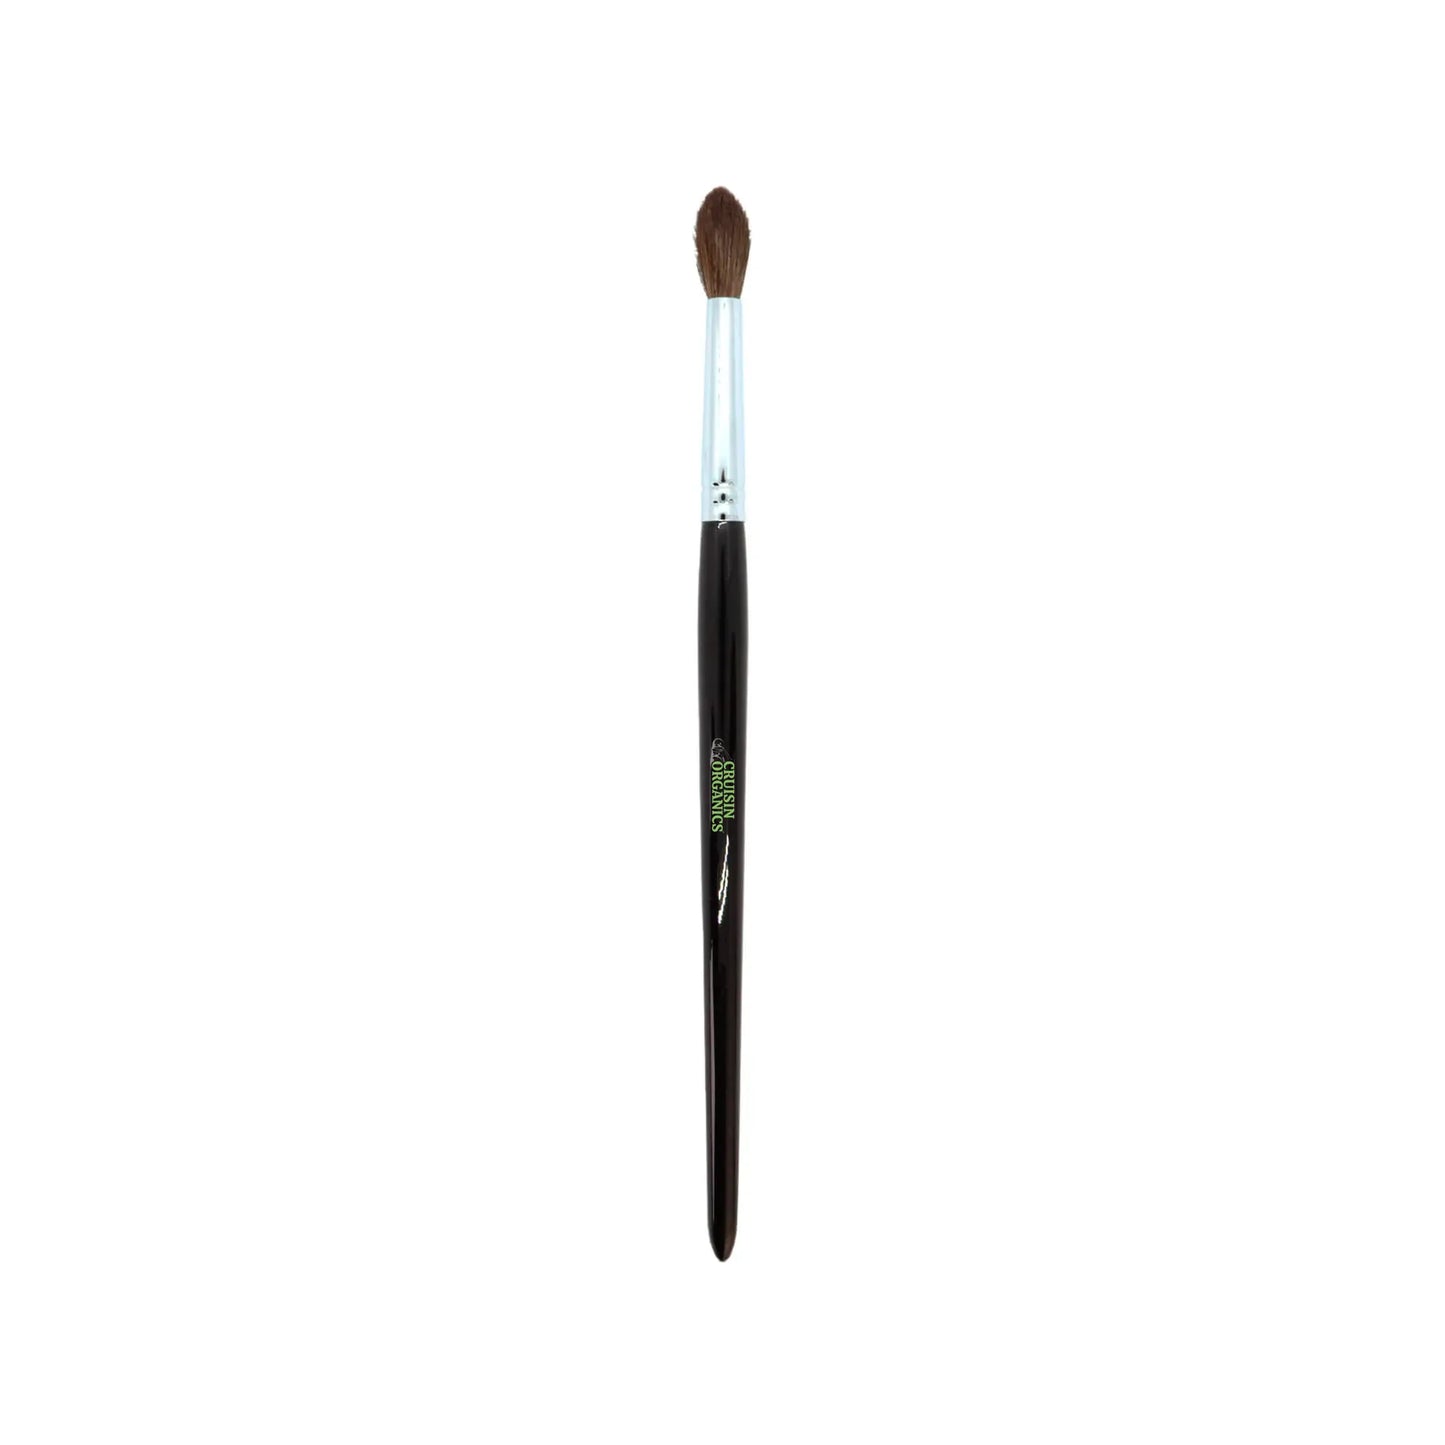 Blend the perfect crease color you’re looking for with our Cruisin Organics crease blender brush. This brush is perfectly shaped to guarantee precise application of color in the crease. Whether you are looking for light definition in the crease or a more dramatic look, this brush will deliver flawless, blended results each time.